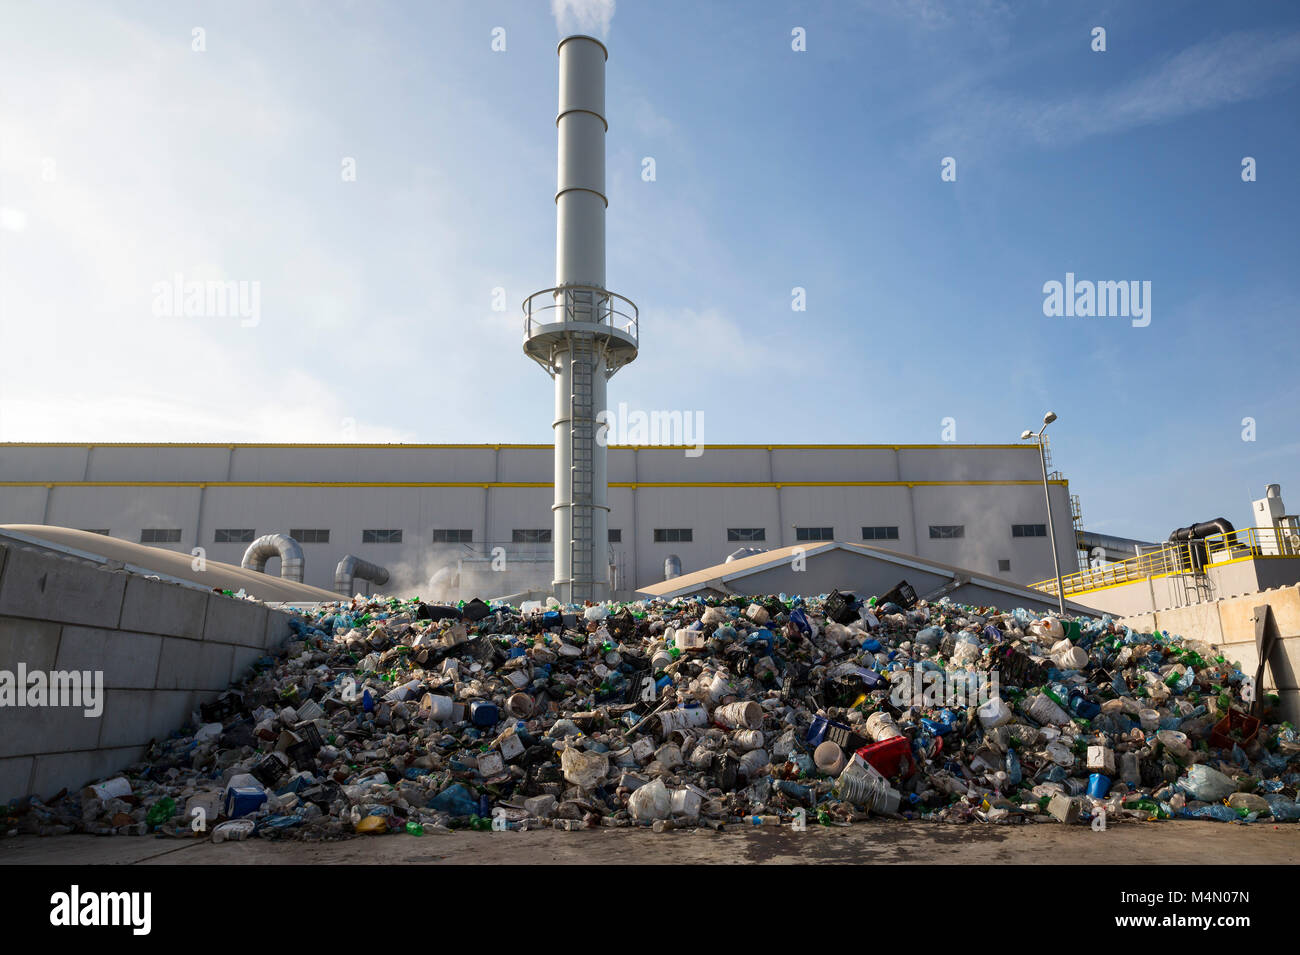 Waste-to-energy or energy-from-waste is the process of generating energy in the form of electricity or heat from the primary treatment of waste. Envir Stock Photo